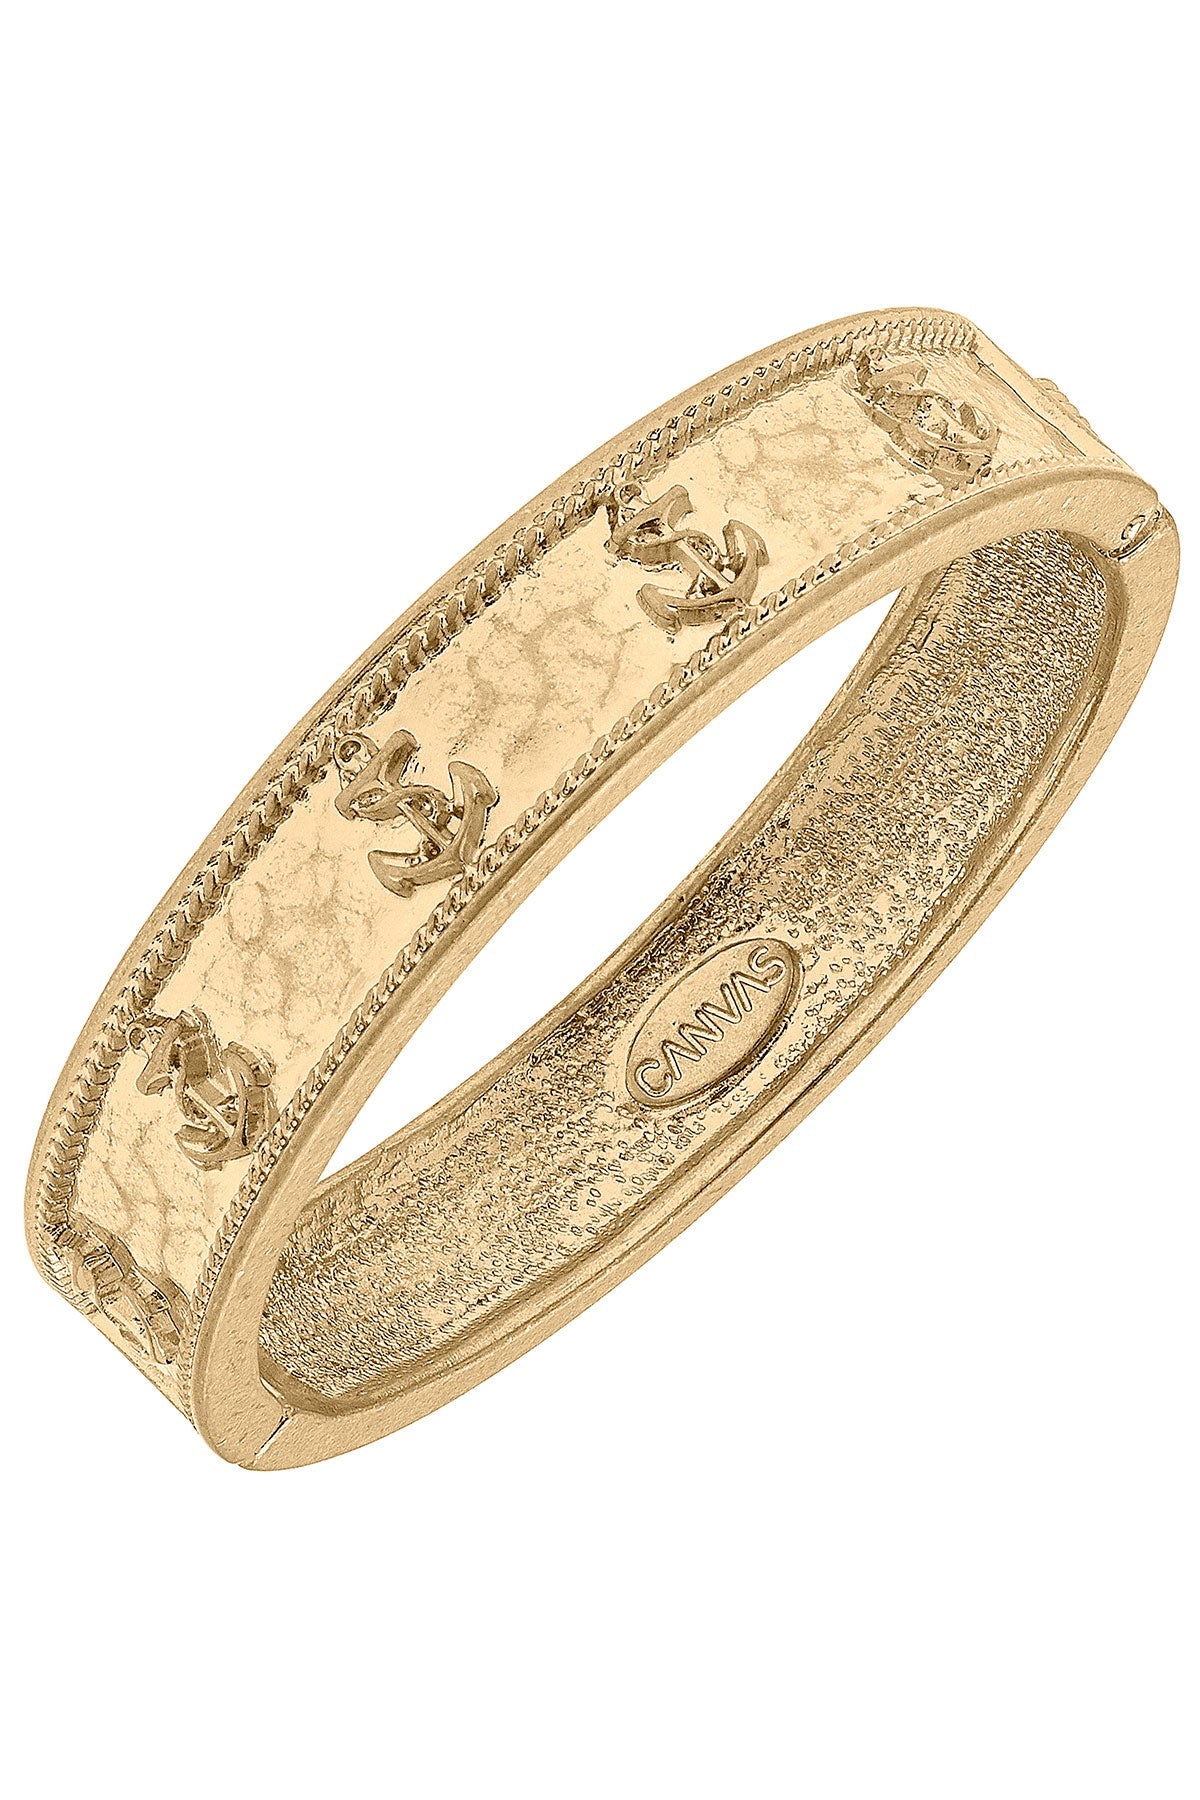 Darcy Nautical Anchor Hinge Bangle in Worn Gold